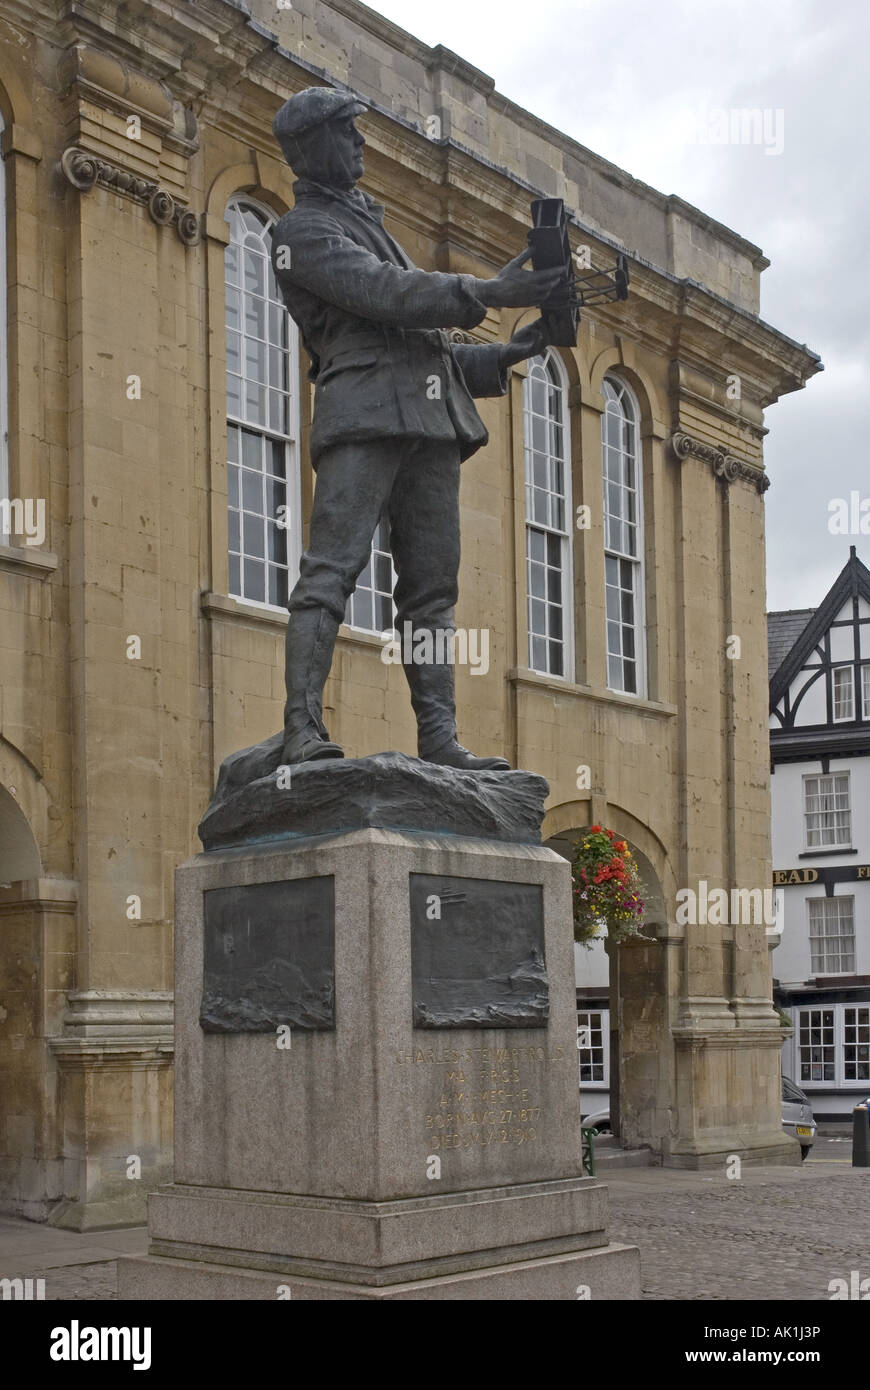 Statue of Charles Stewart Rolls, of Rolls-Royce fame,  in Agincourt Square, Monmouth, Wales Stock Photo